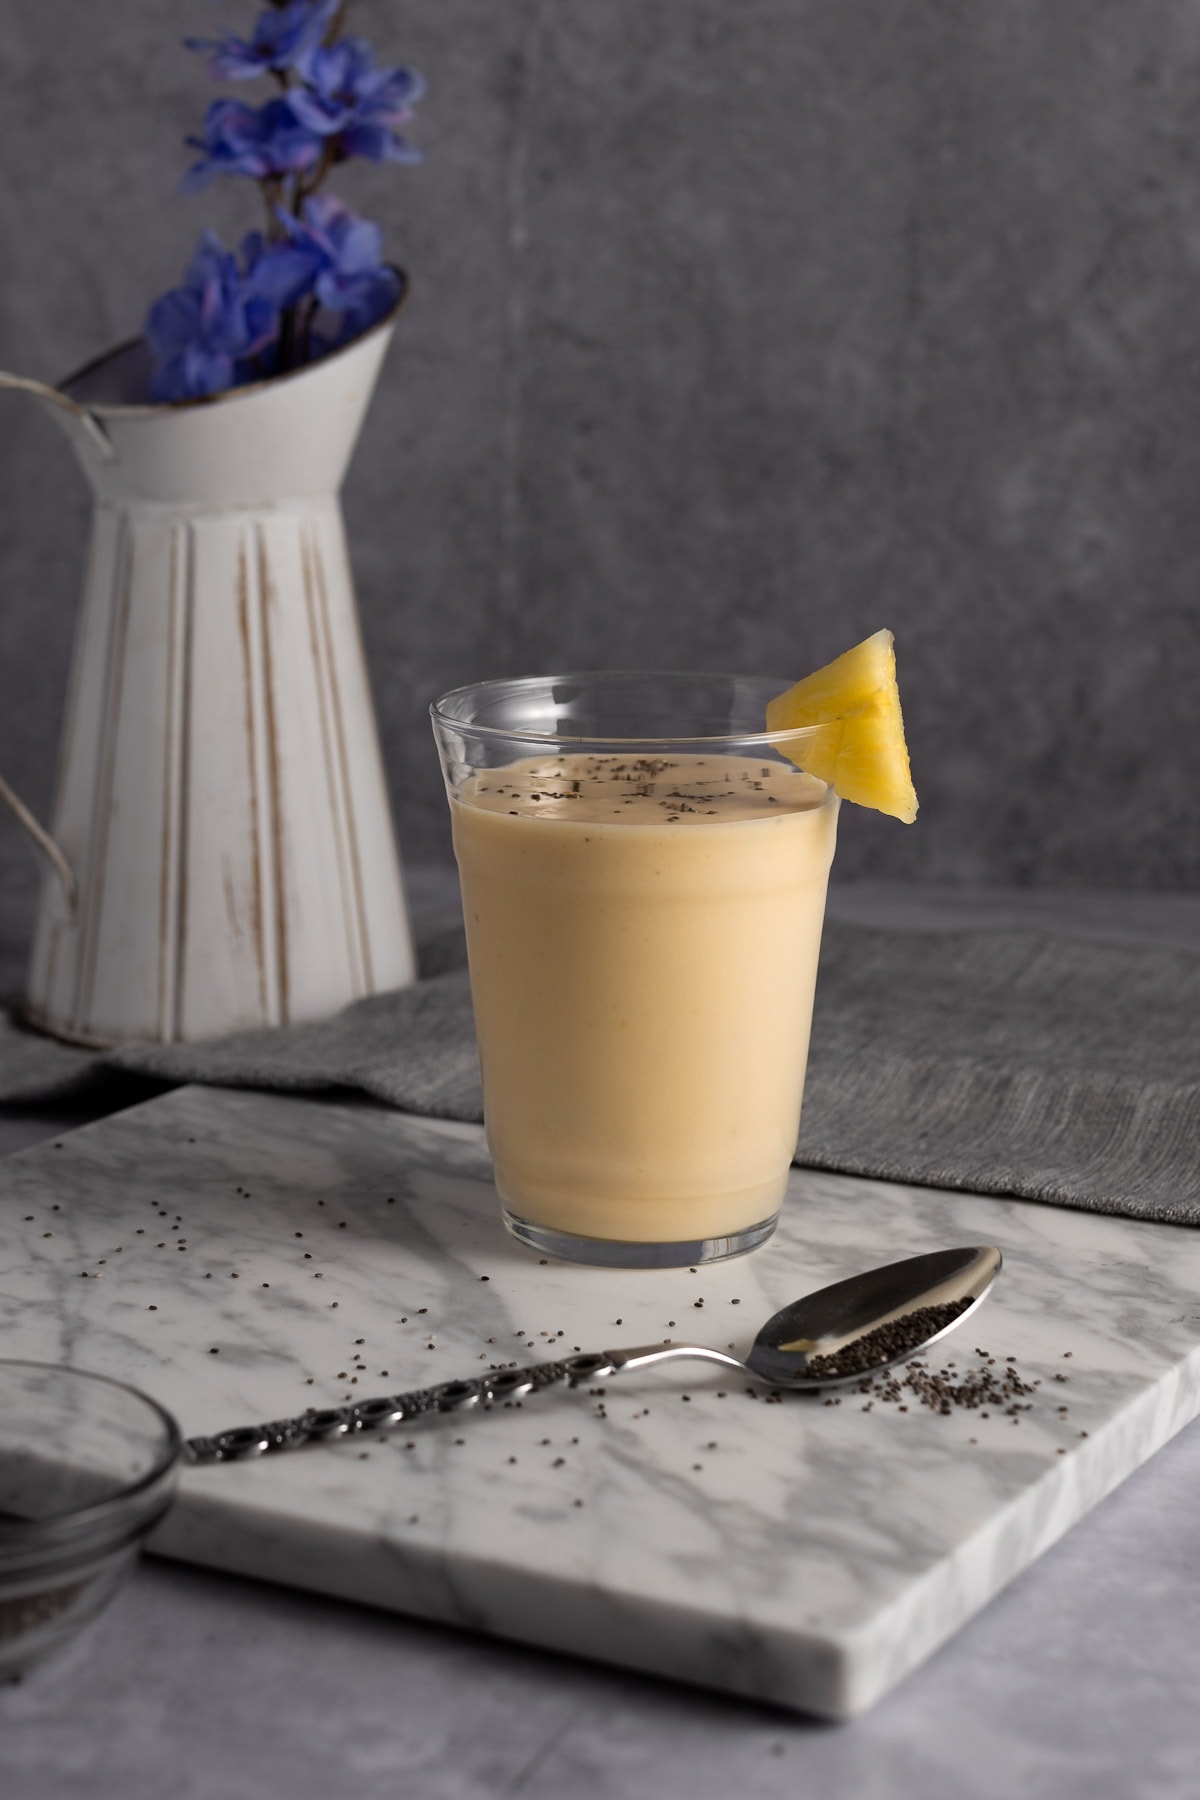 A yellow pineapple banana smoothie on a grey marble board, next to a grey napkin, with a white pot filled with blue flowers in the background.